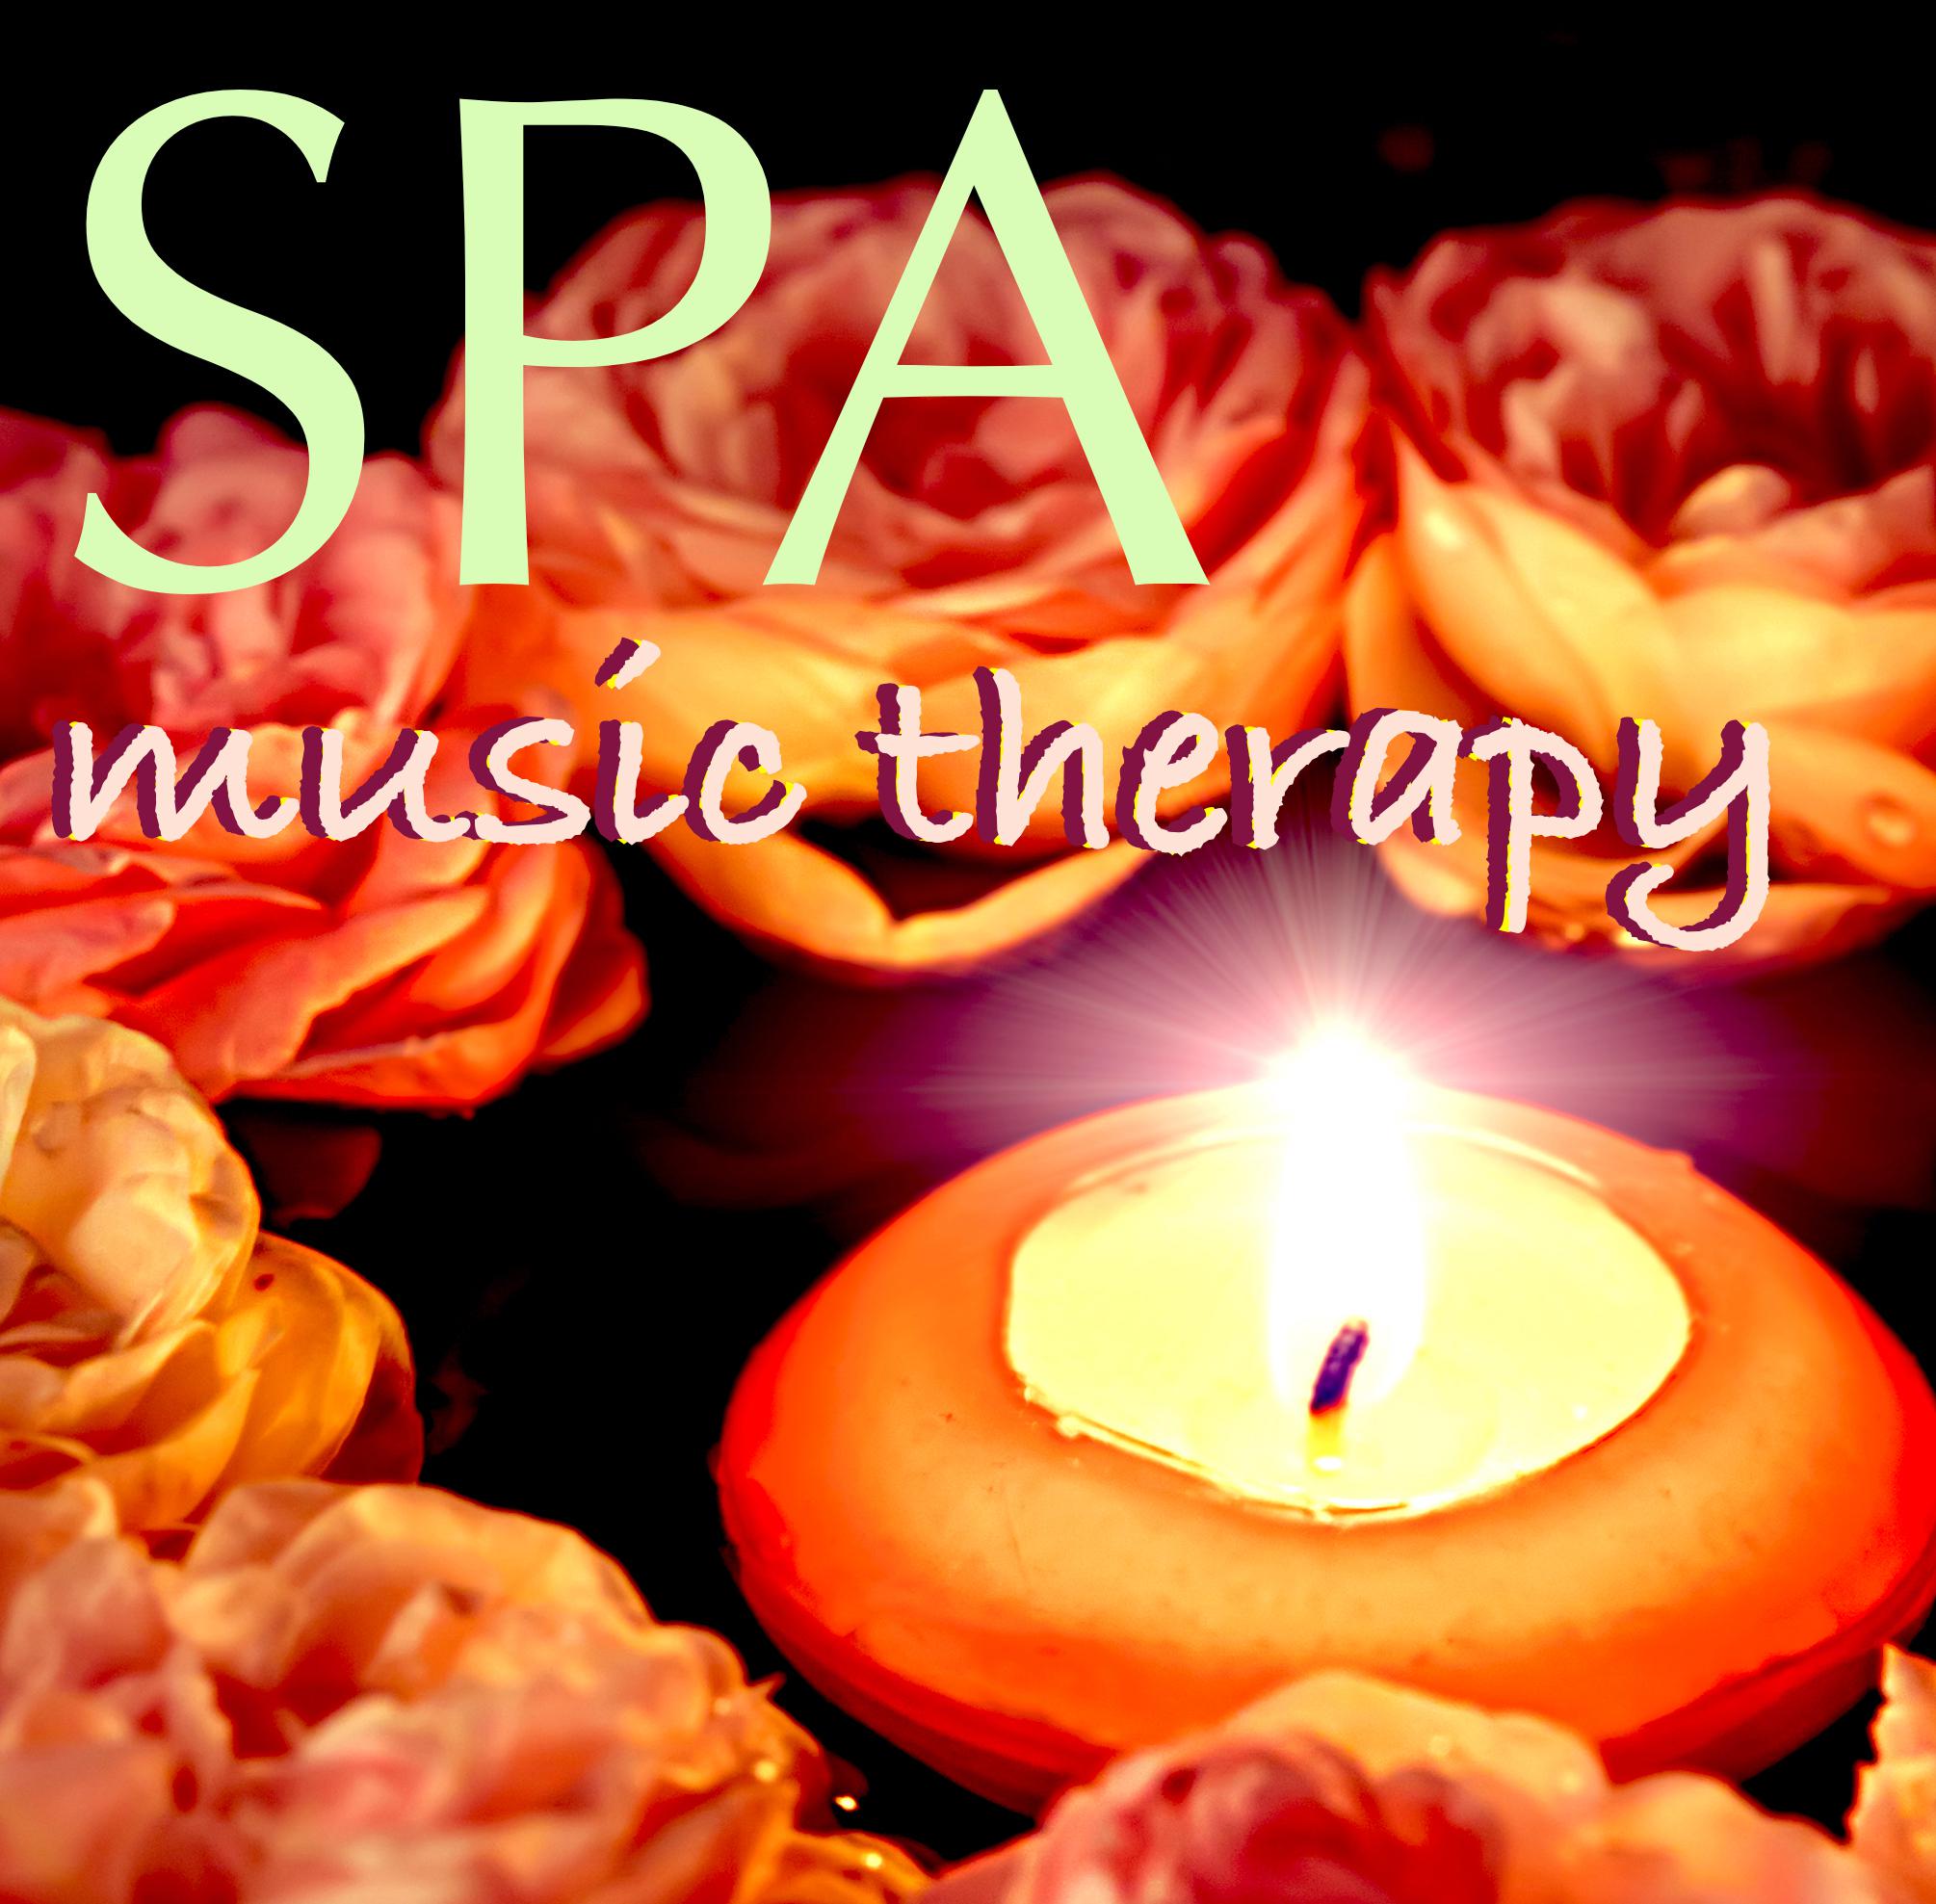 Soothing Sound Effects for Spa Music (Serene River Water Babbling)